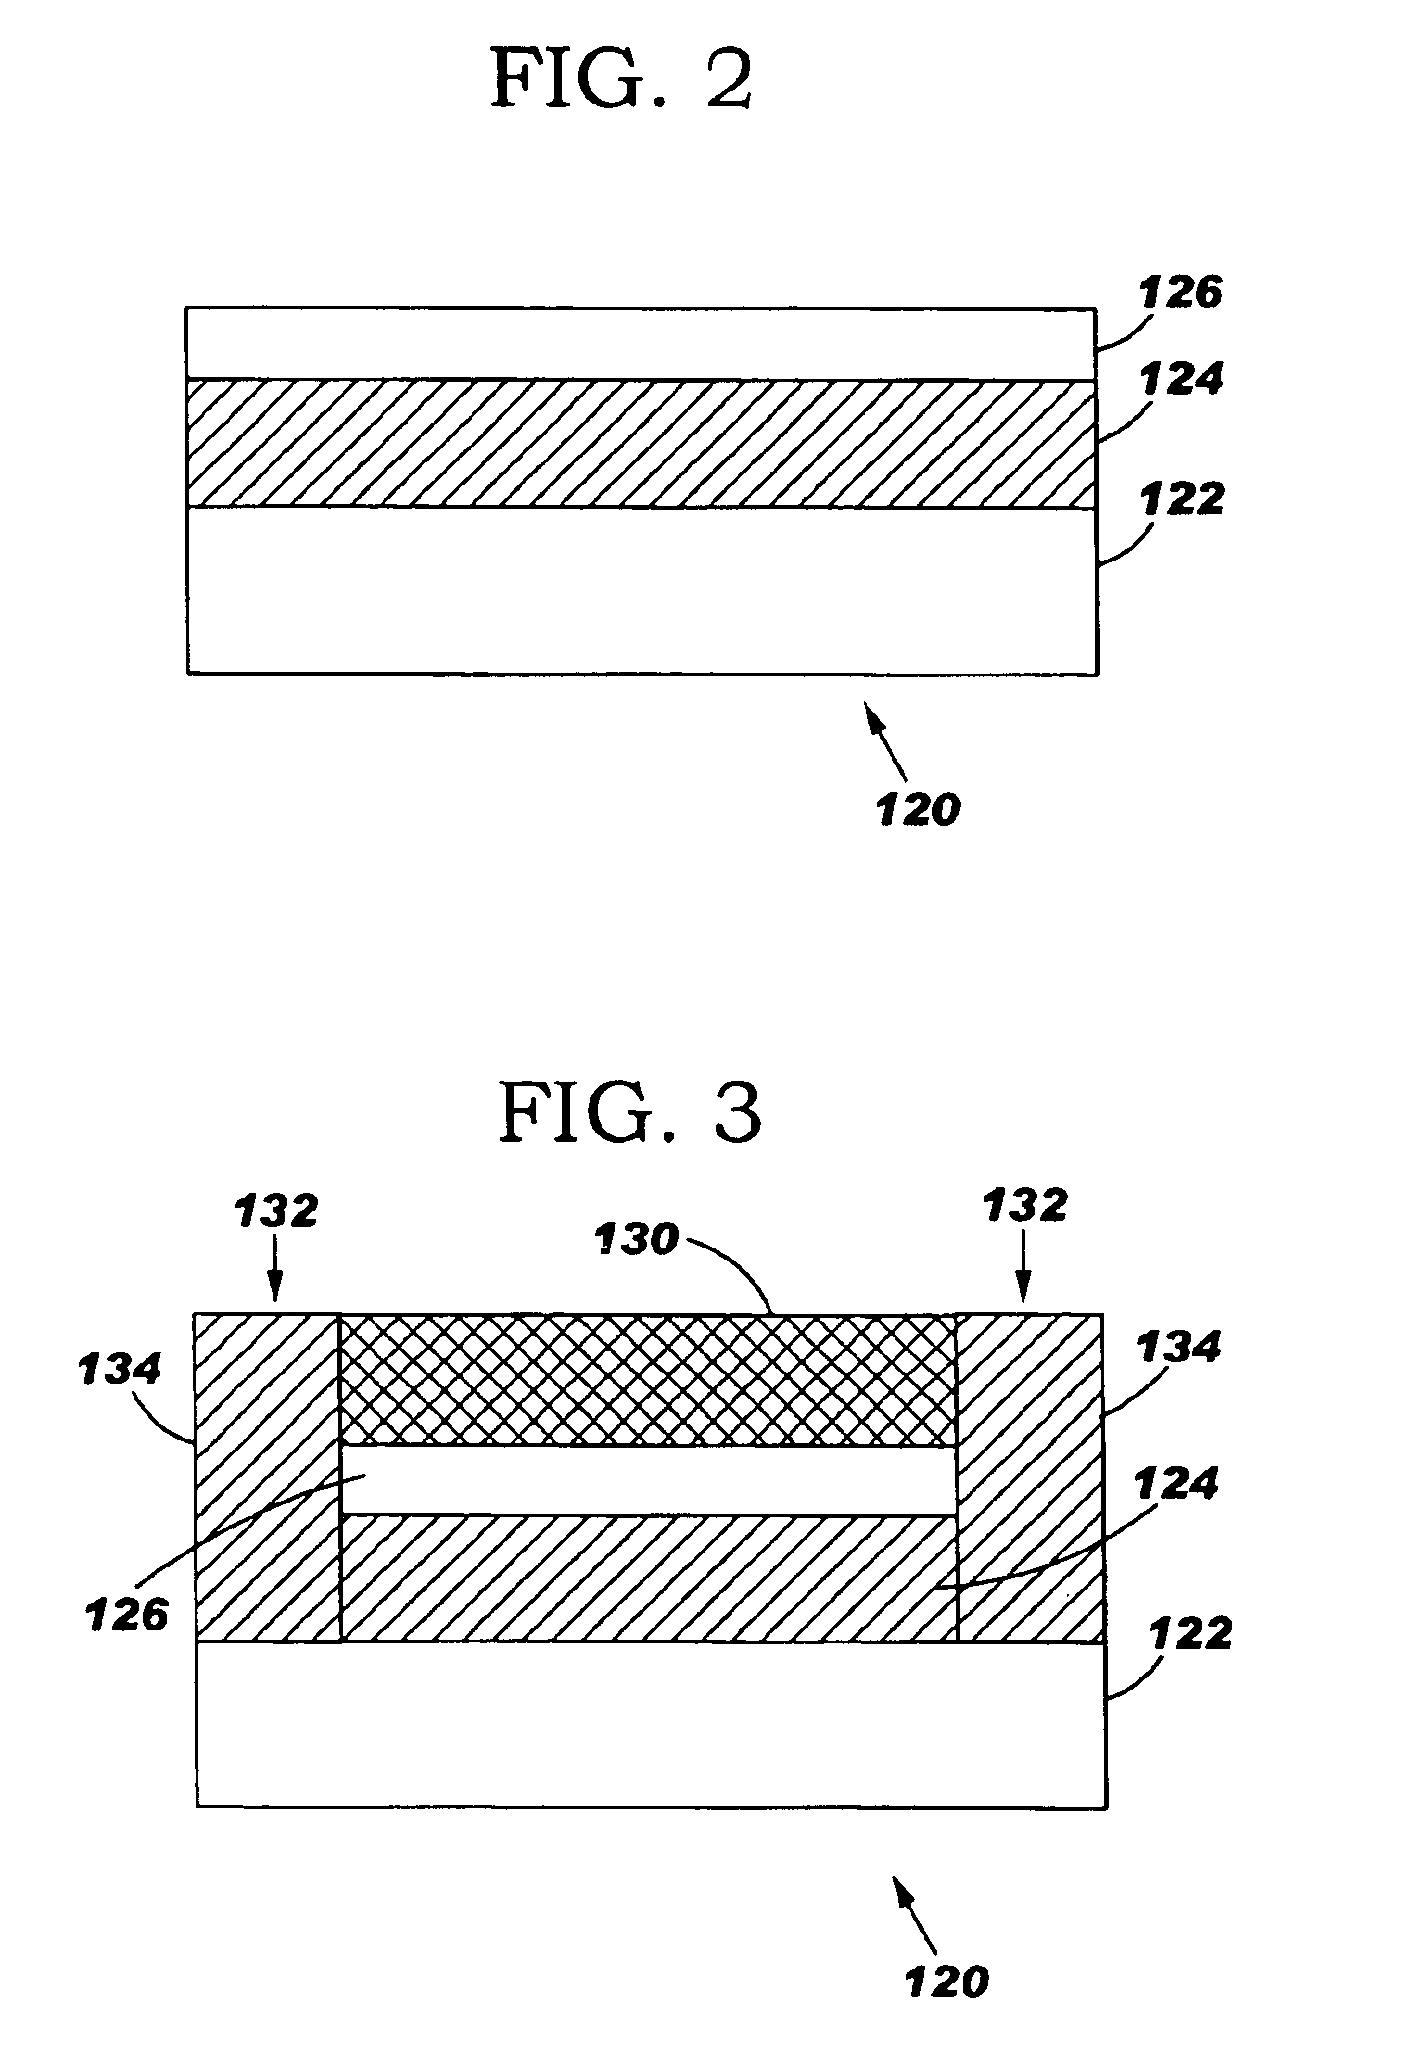 High performance FET with elevated source/drain region